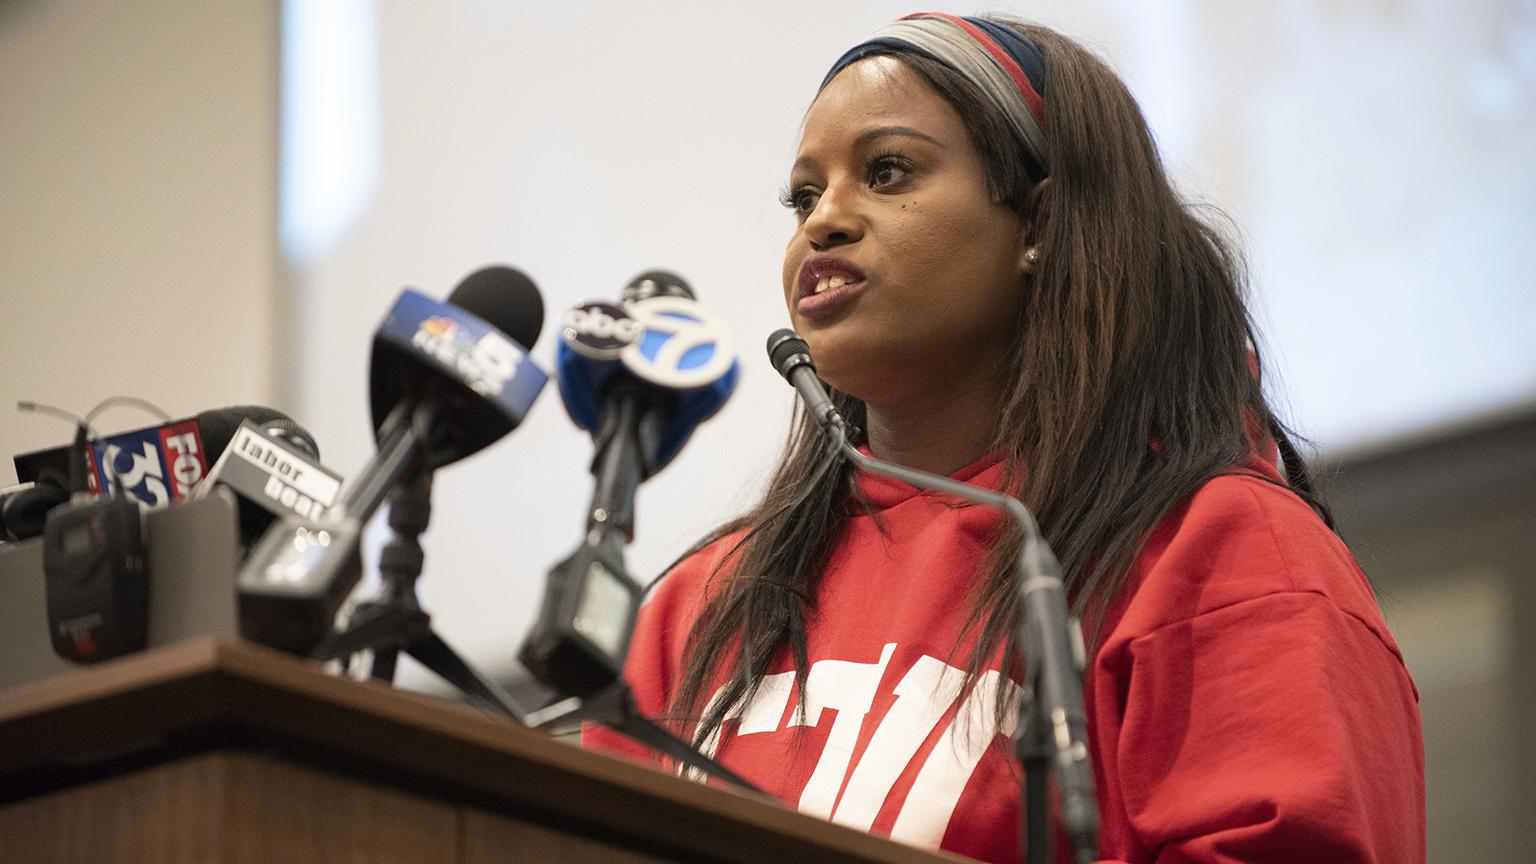 Stacy Davis Gates, vice president of the Chicago Teachers Union, speaks during a news conference at the CTU headquarters in Chicago on Sunday, Dec. 9, 2018. (Colin Boyle / Chicago Sun-Times via AP)